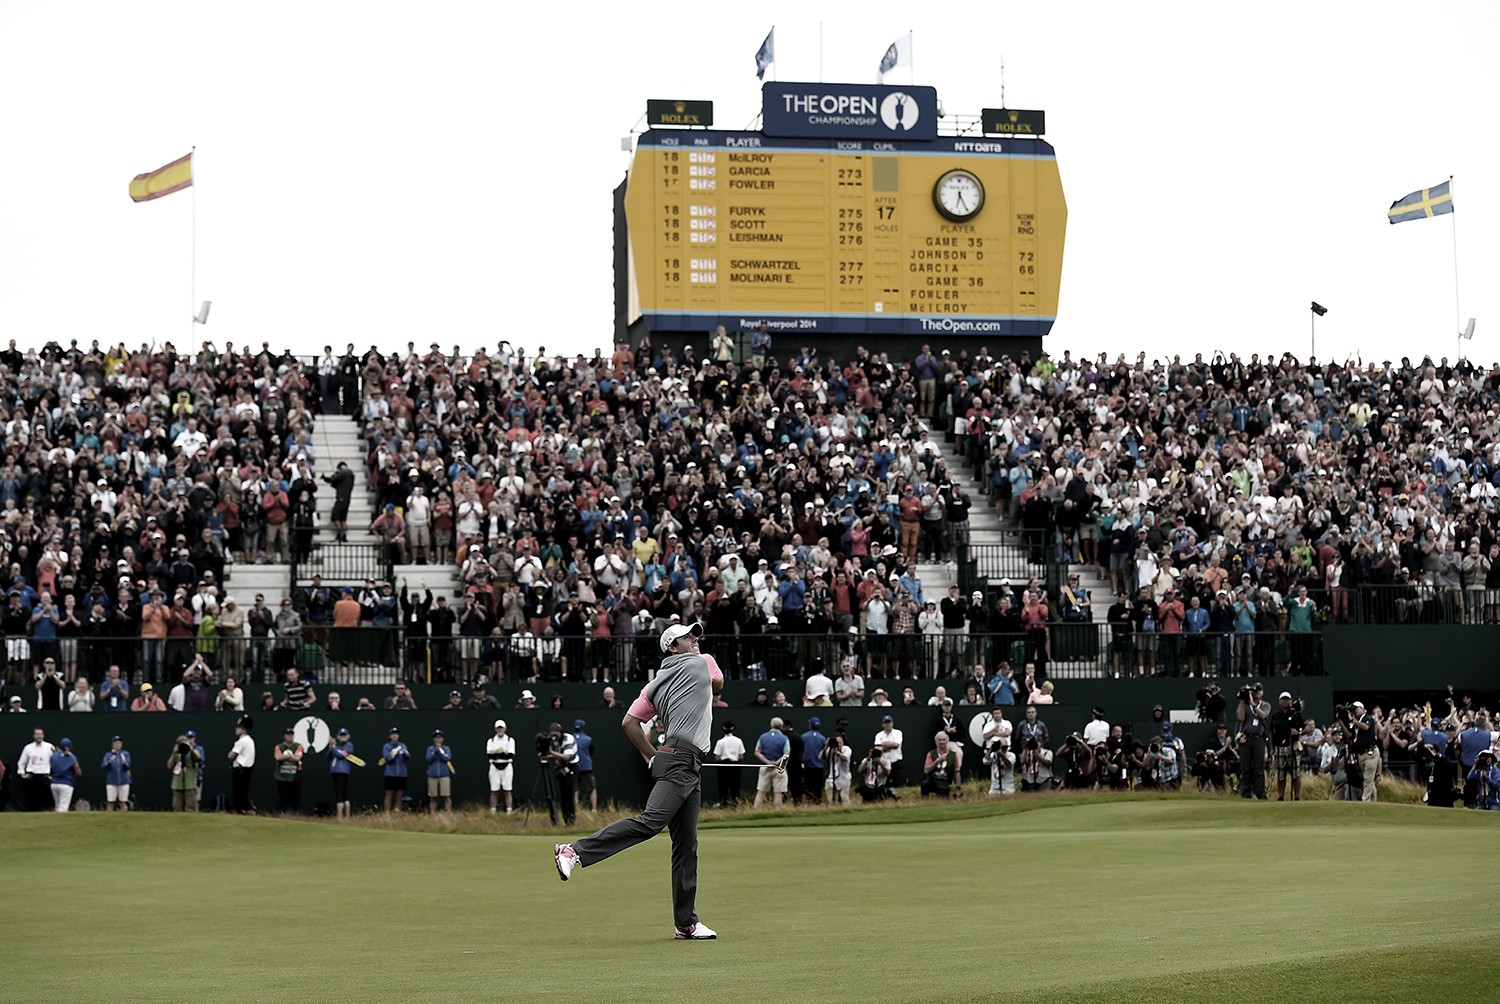 Rory McIlroy winning The Open at Royal Liverpool